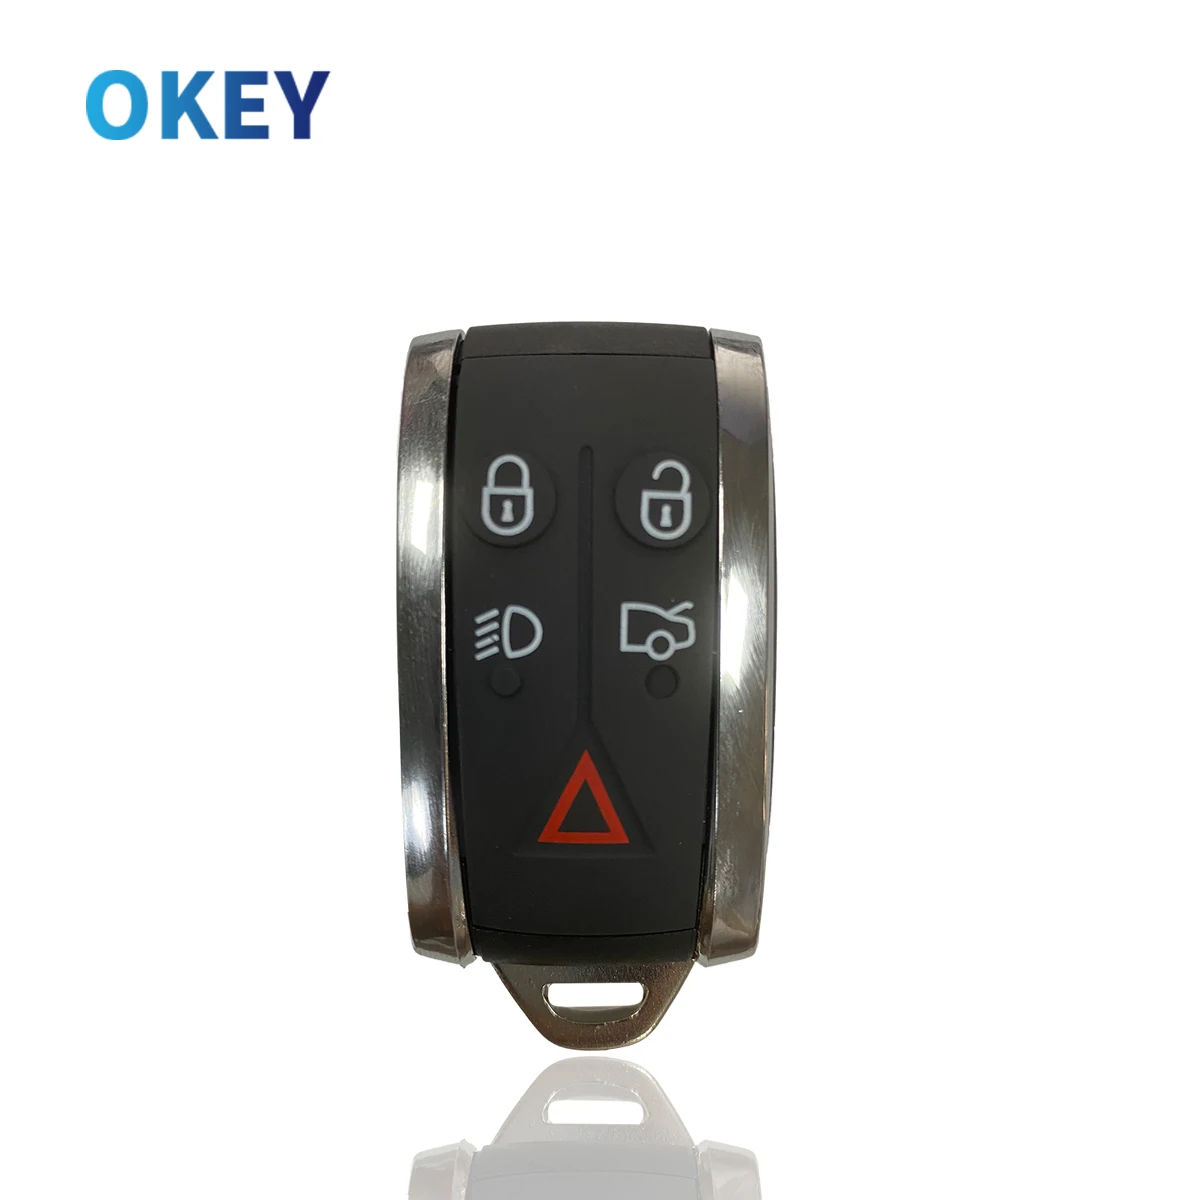 Okey Smart Remote Car Key Shell Replacement Case For JAGUAR X TYPE S XKR XF XK 2007 2008 2009 2010 2012 5 Button With Blade